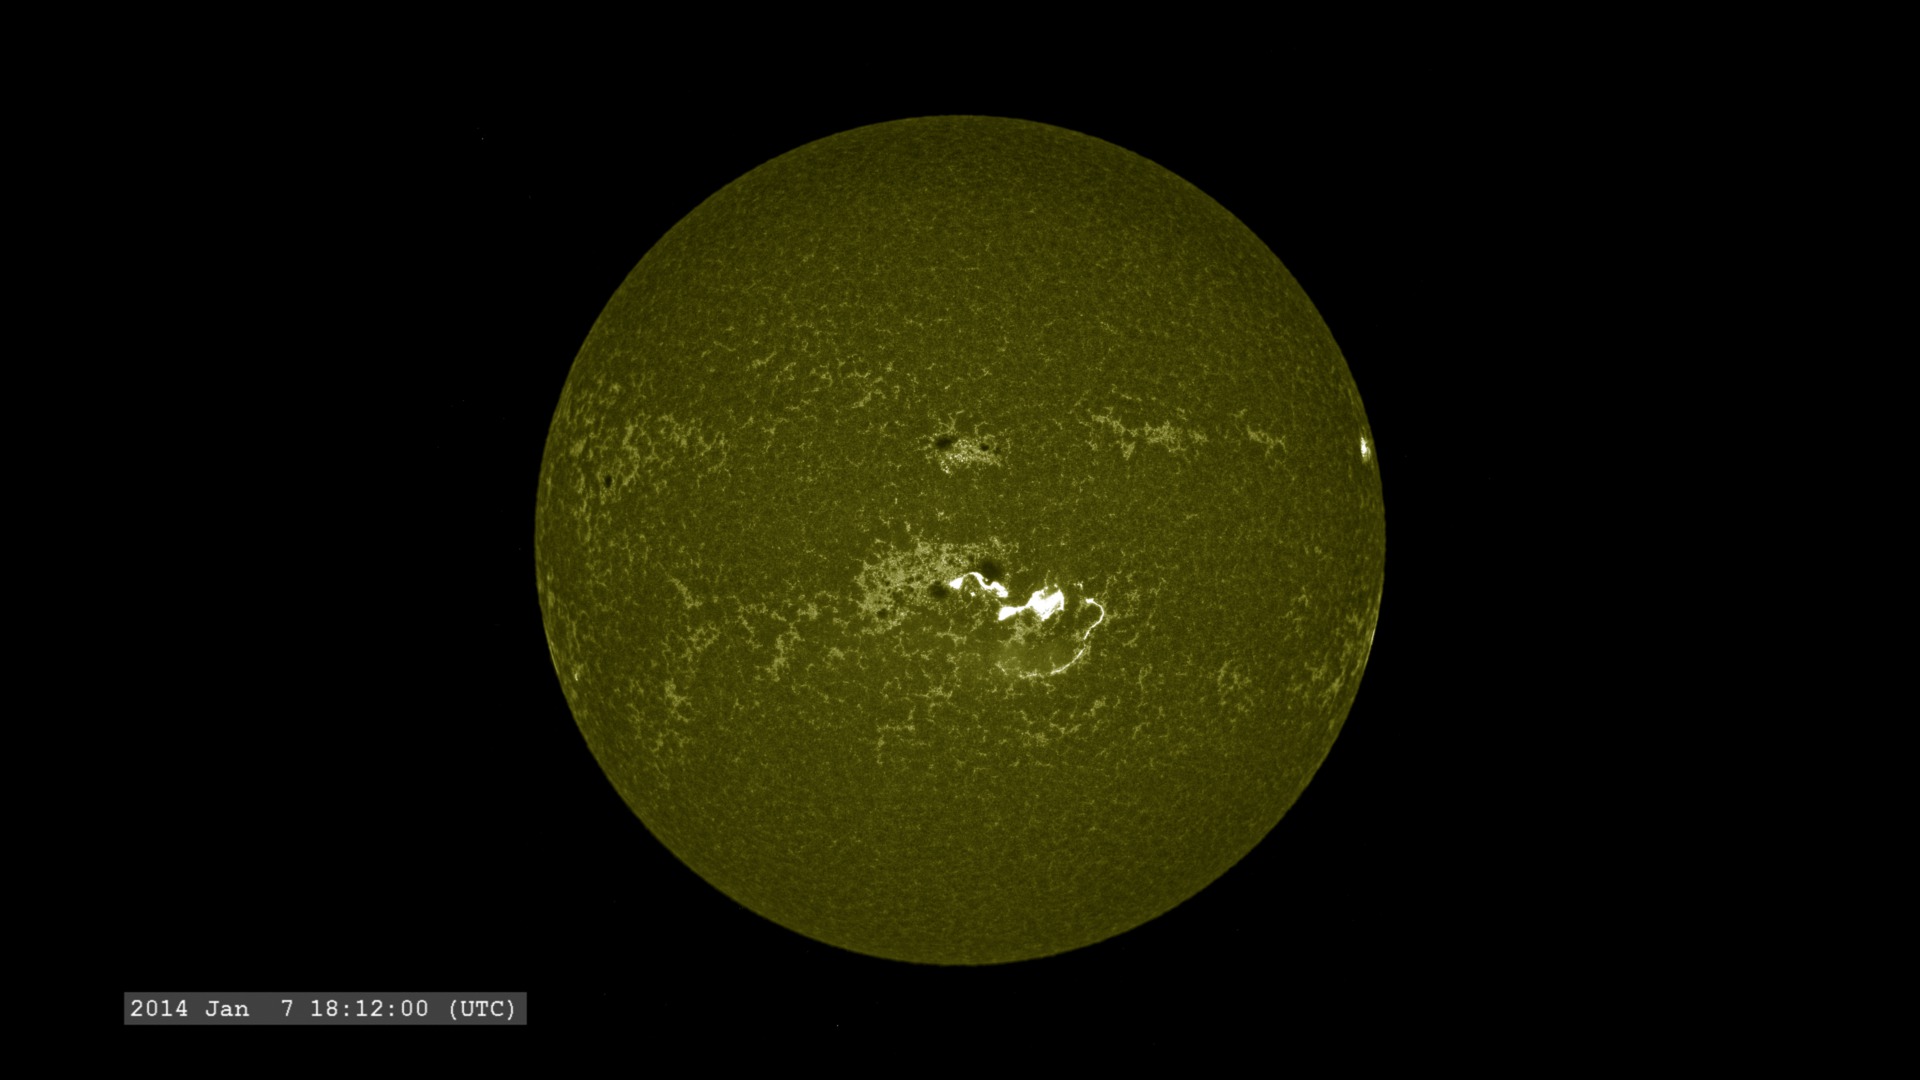 At the ultraviolet wavelength of 160 nm, we see an image which still resembles the view in visible light, but with the faculae surrounding the sunspots more visible.  The flare appears like a bright arc from the regions.